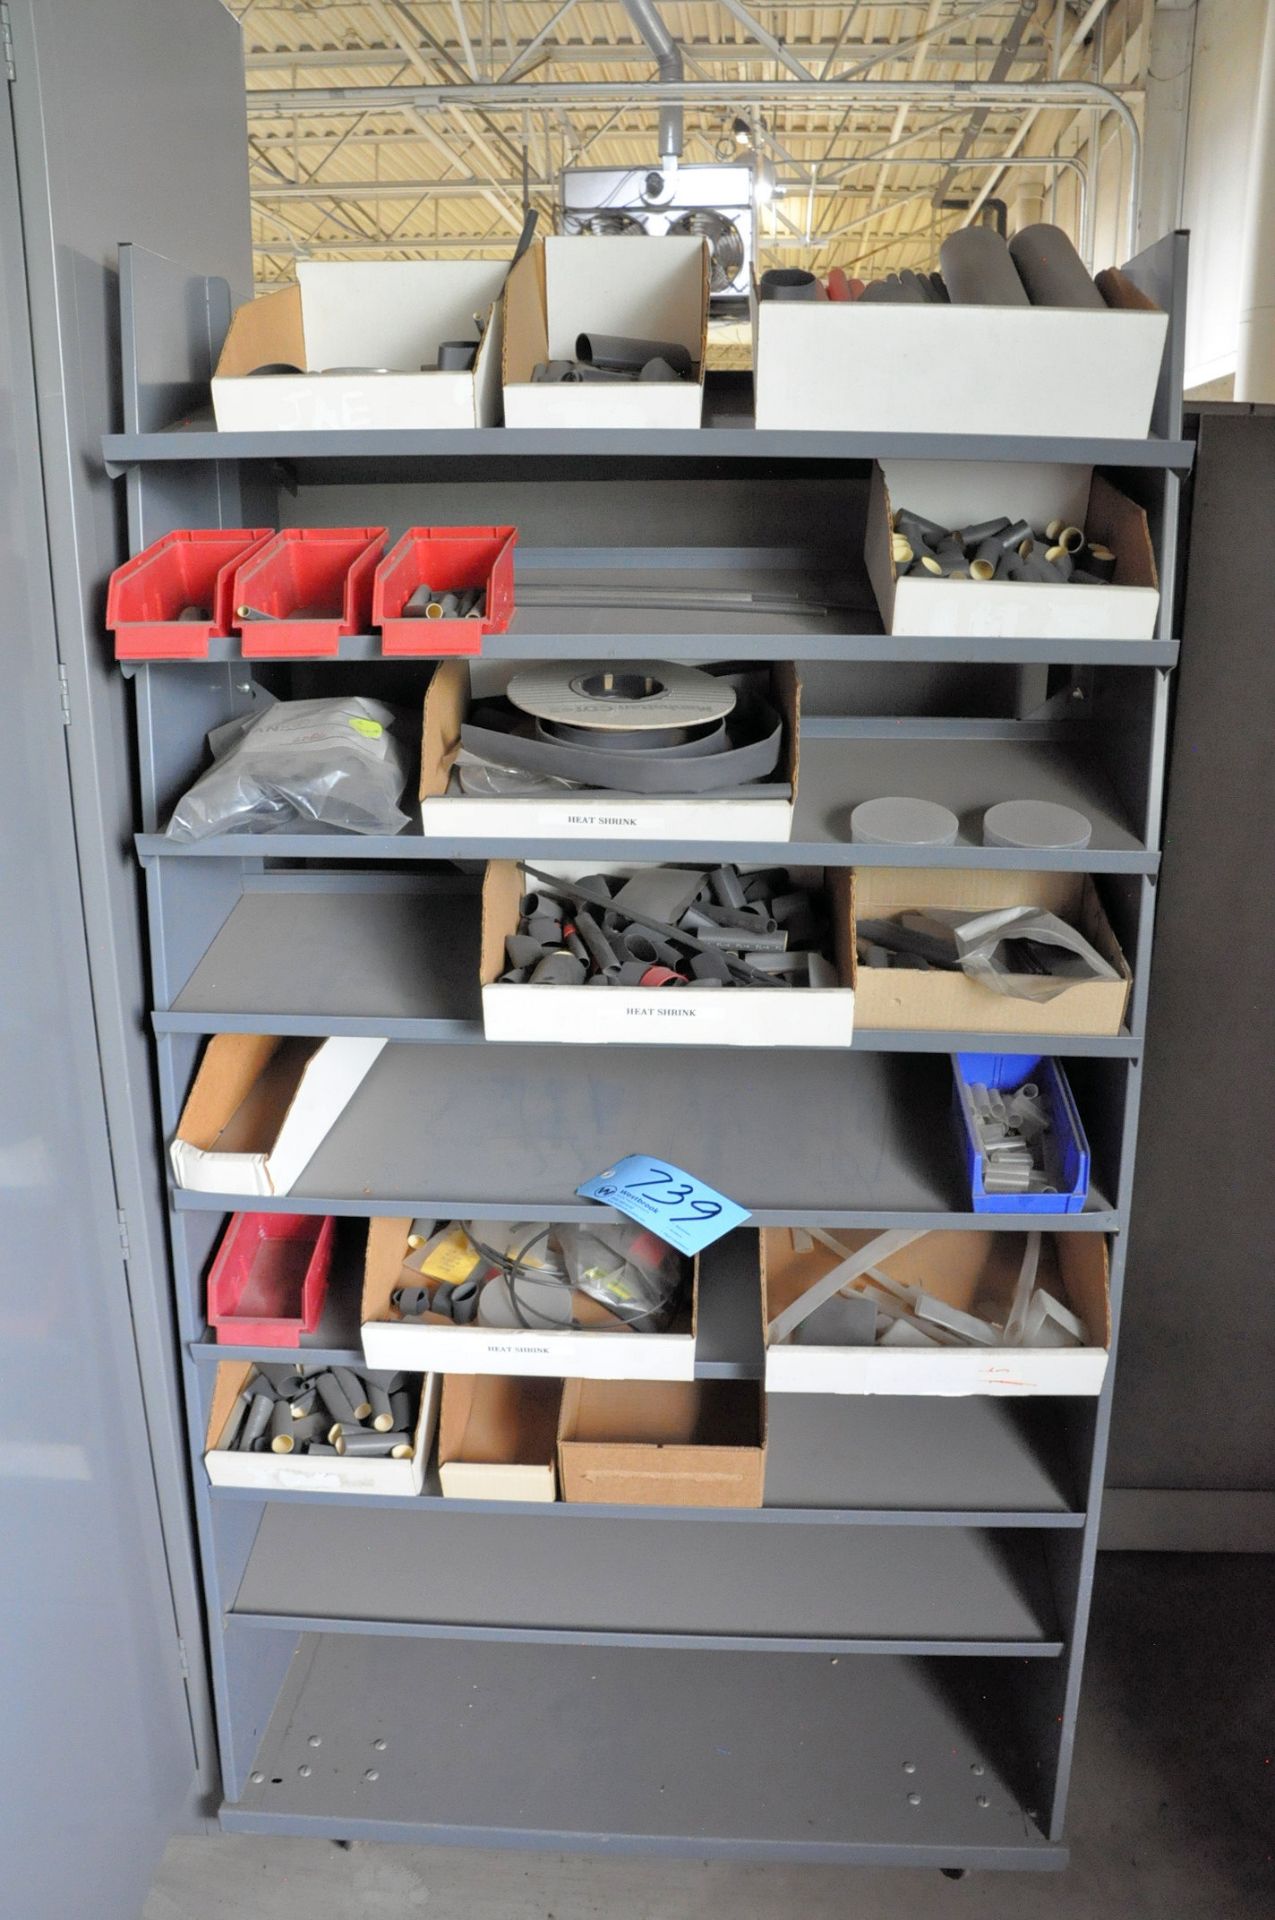 Lot-(4) Cabinets and (1) Shelving Unit with Various Electrical Components Contents - Image 7 of 7